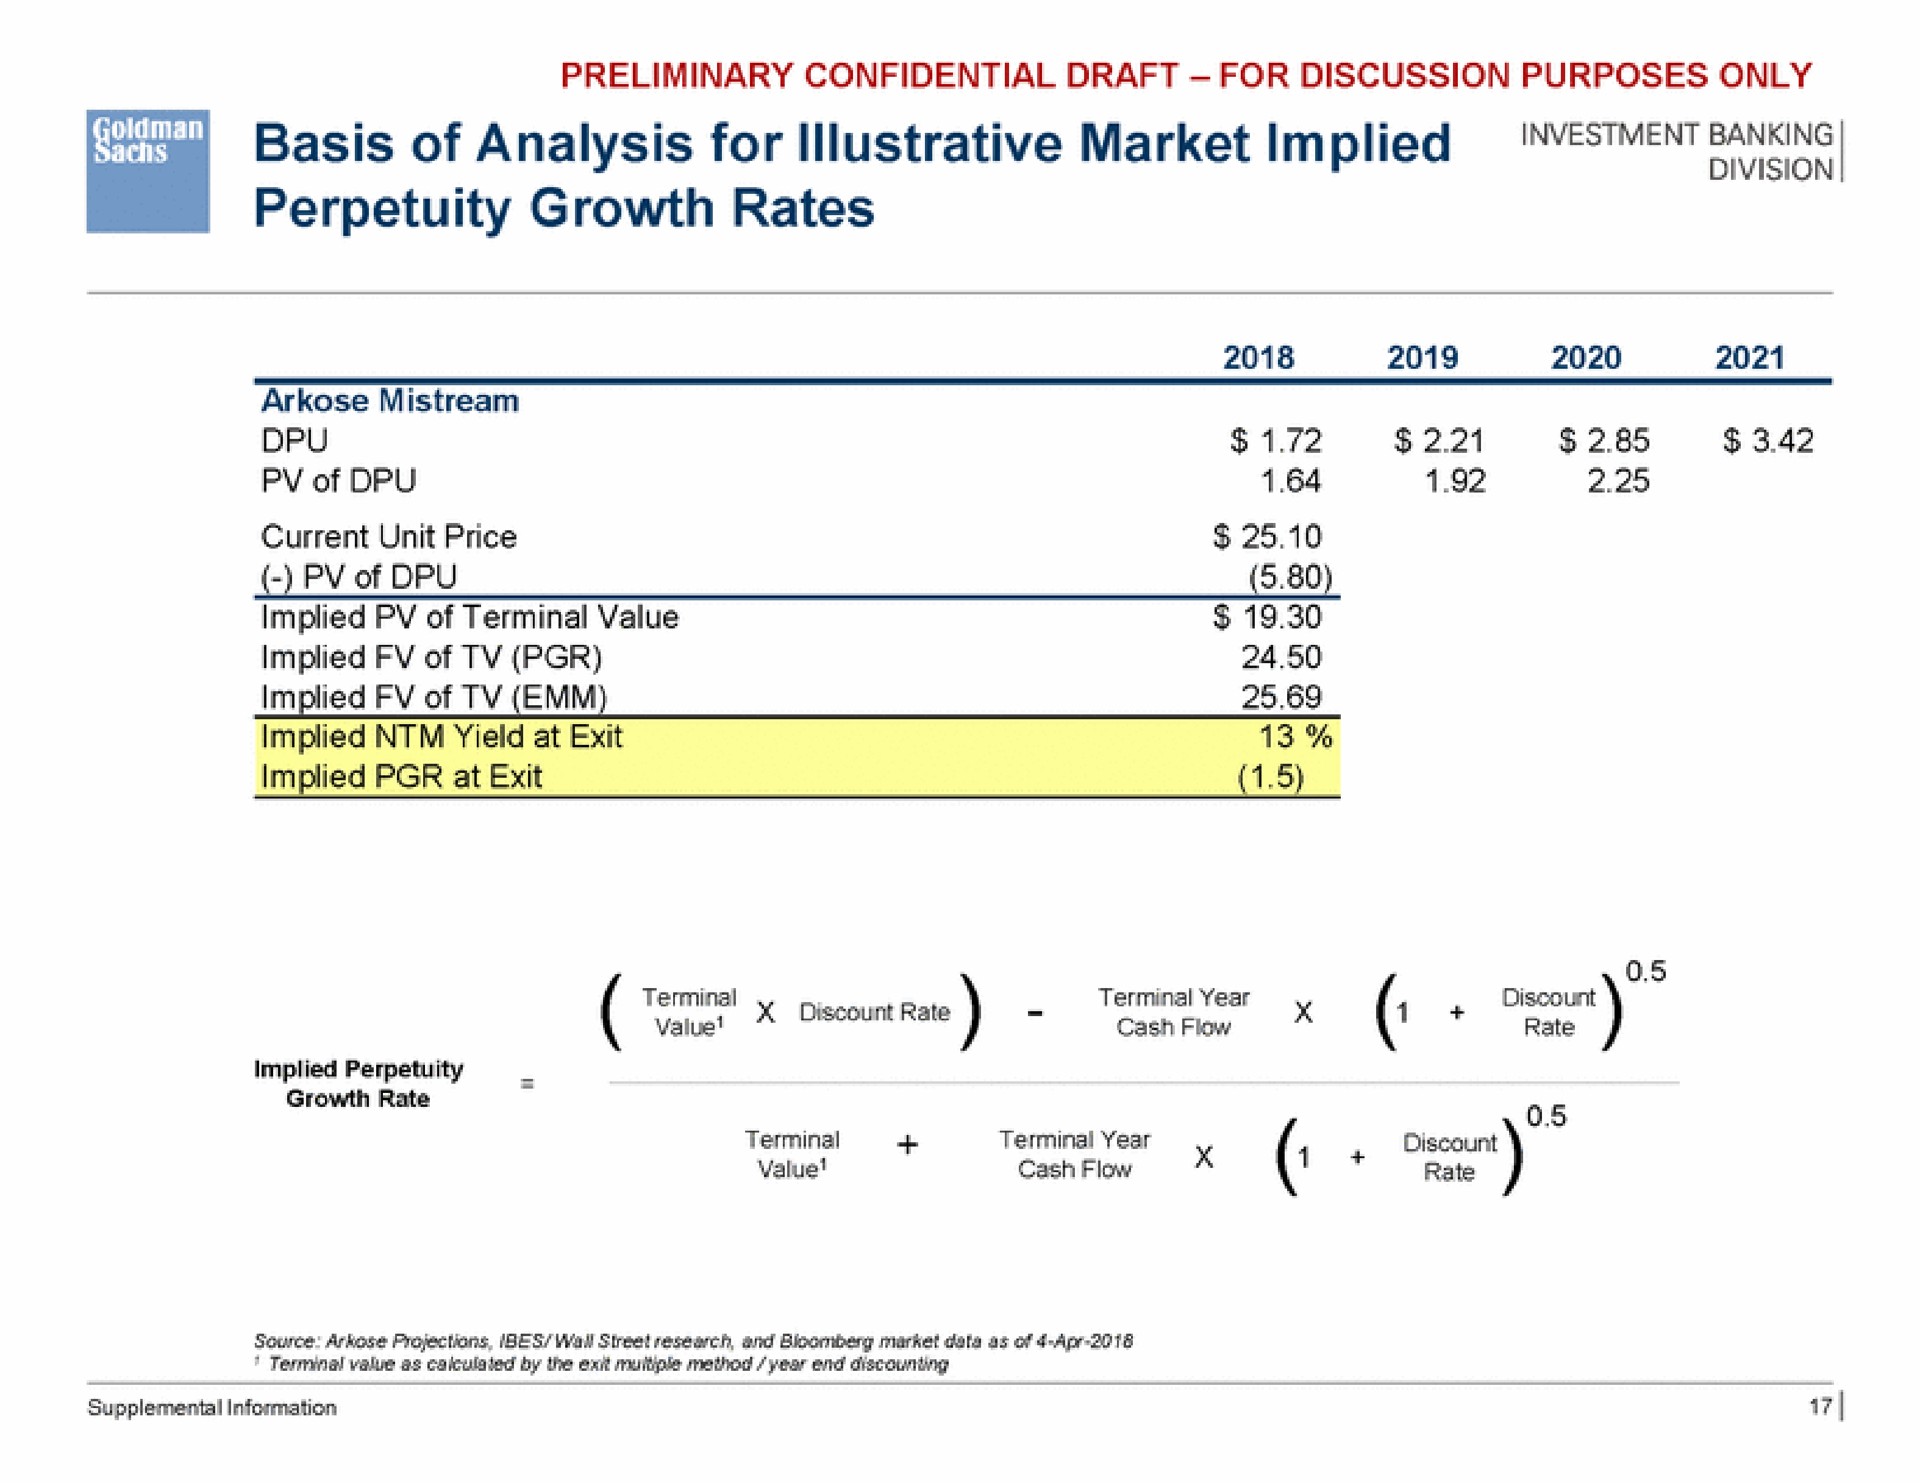 basis of analysis for illustrative market implied banking perpetuity growth rates | Goldman Sachs